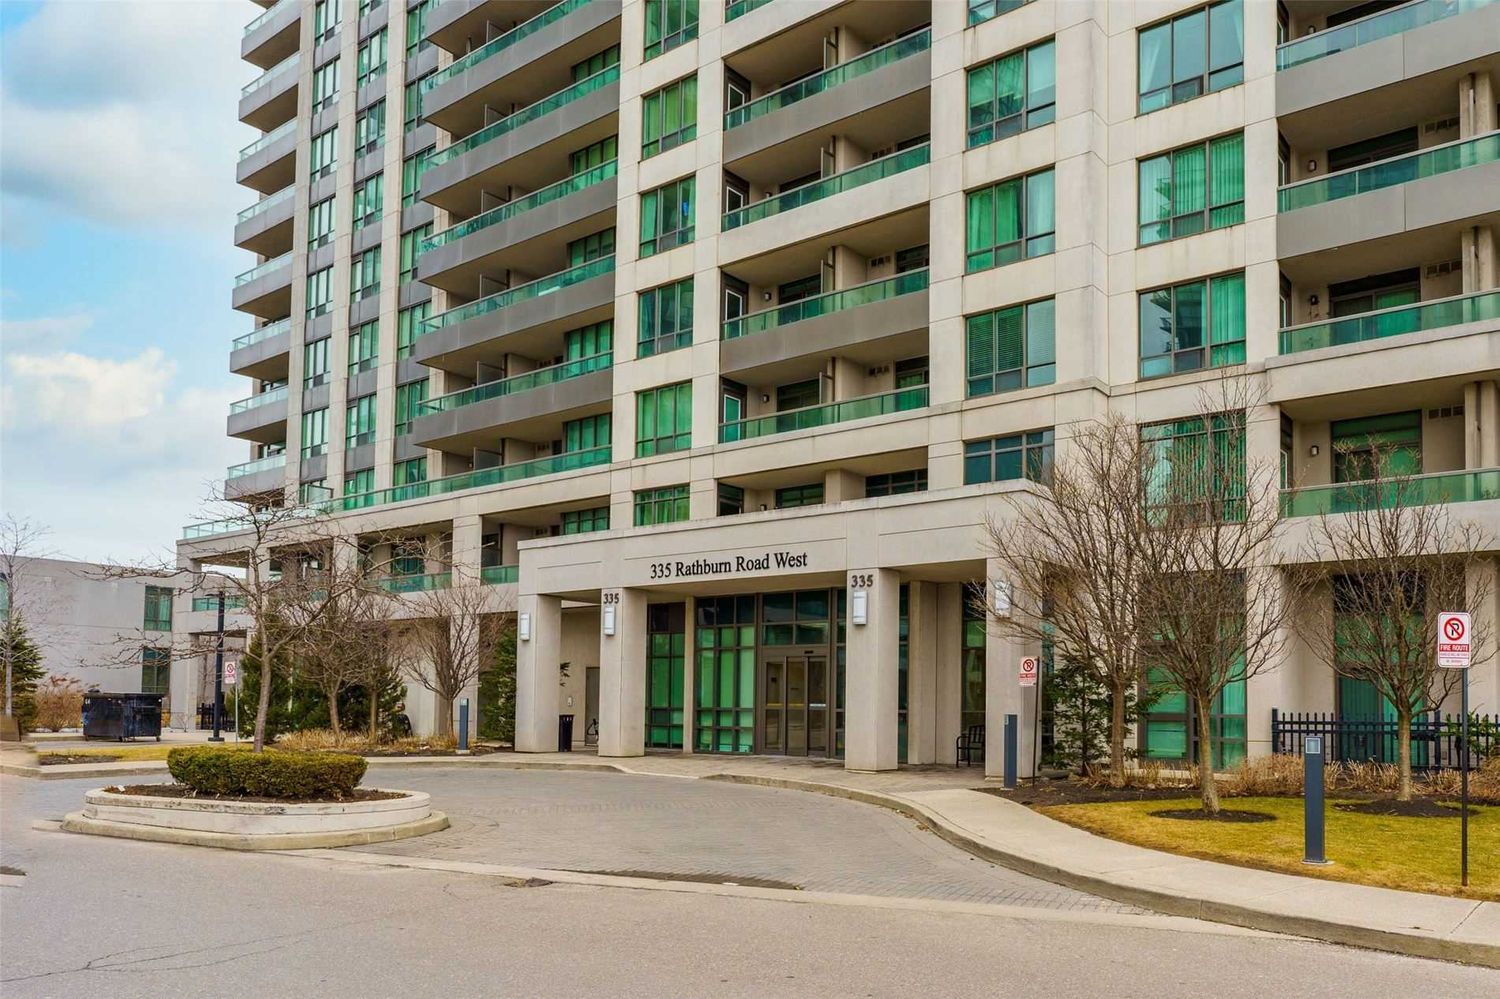 335 Rathburn Road W. Universal Condos is located in  Mississauga, Toronto - image #3 of 3